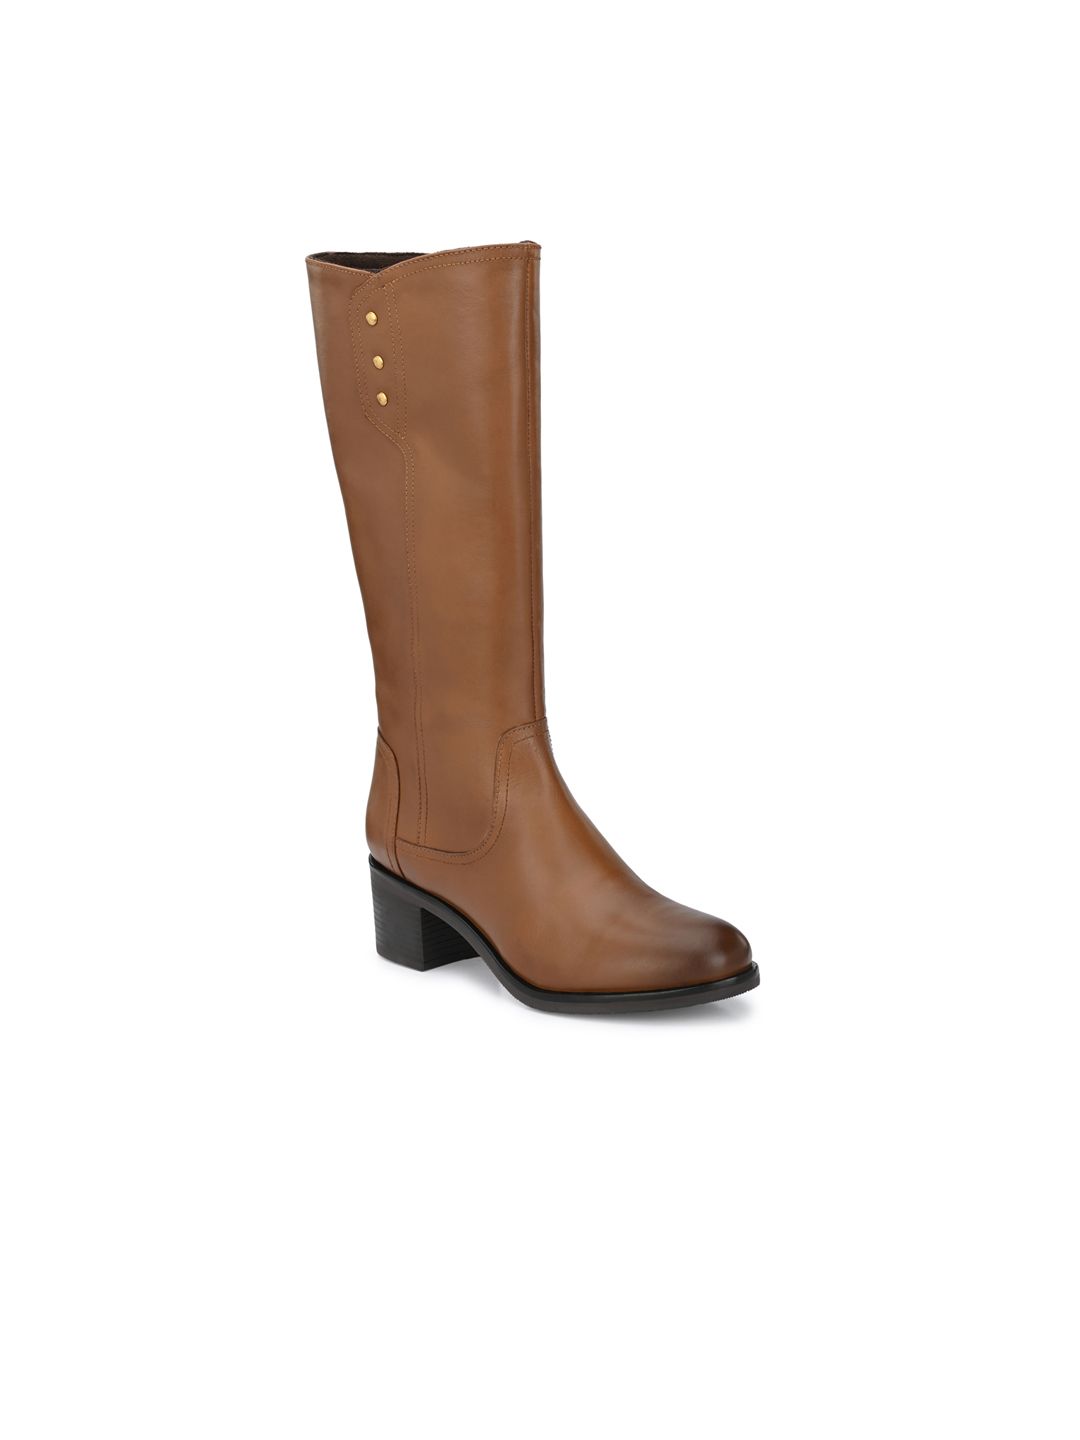 Delize Tan Leather Block Heeled Knee Boots Price in India